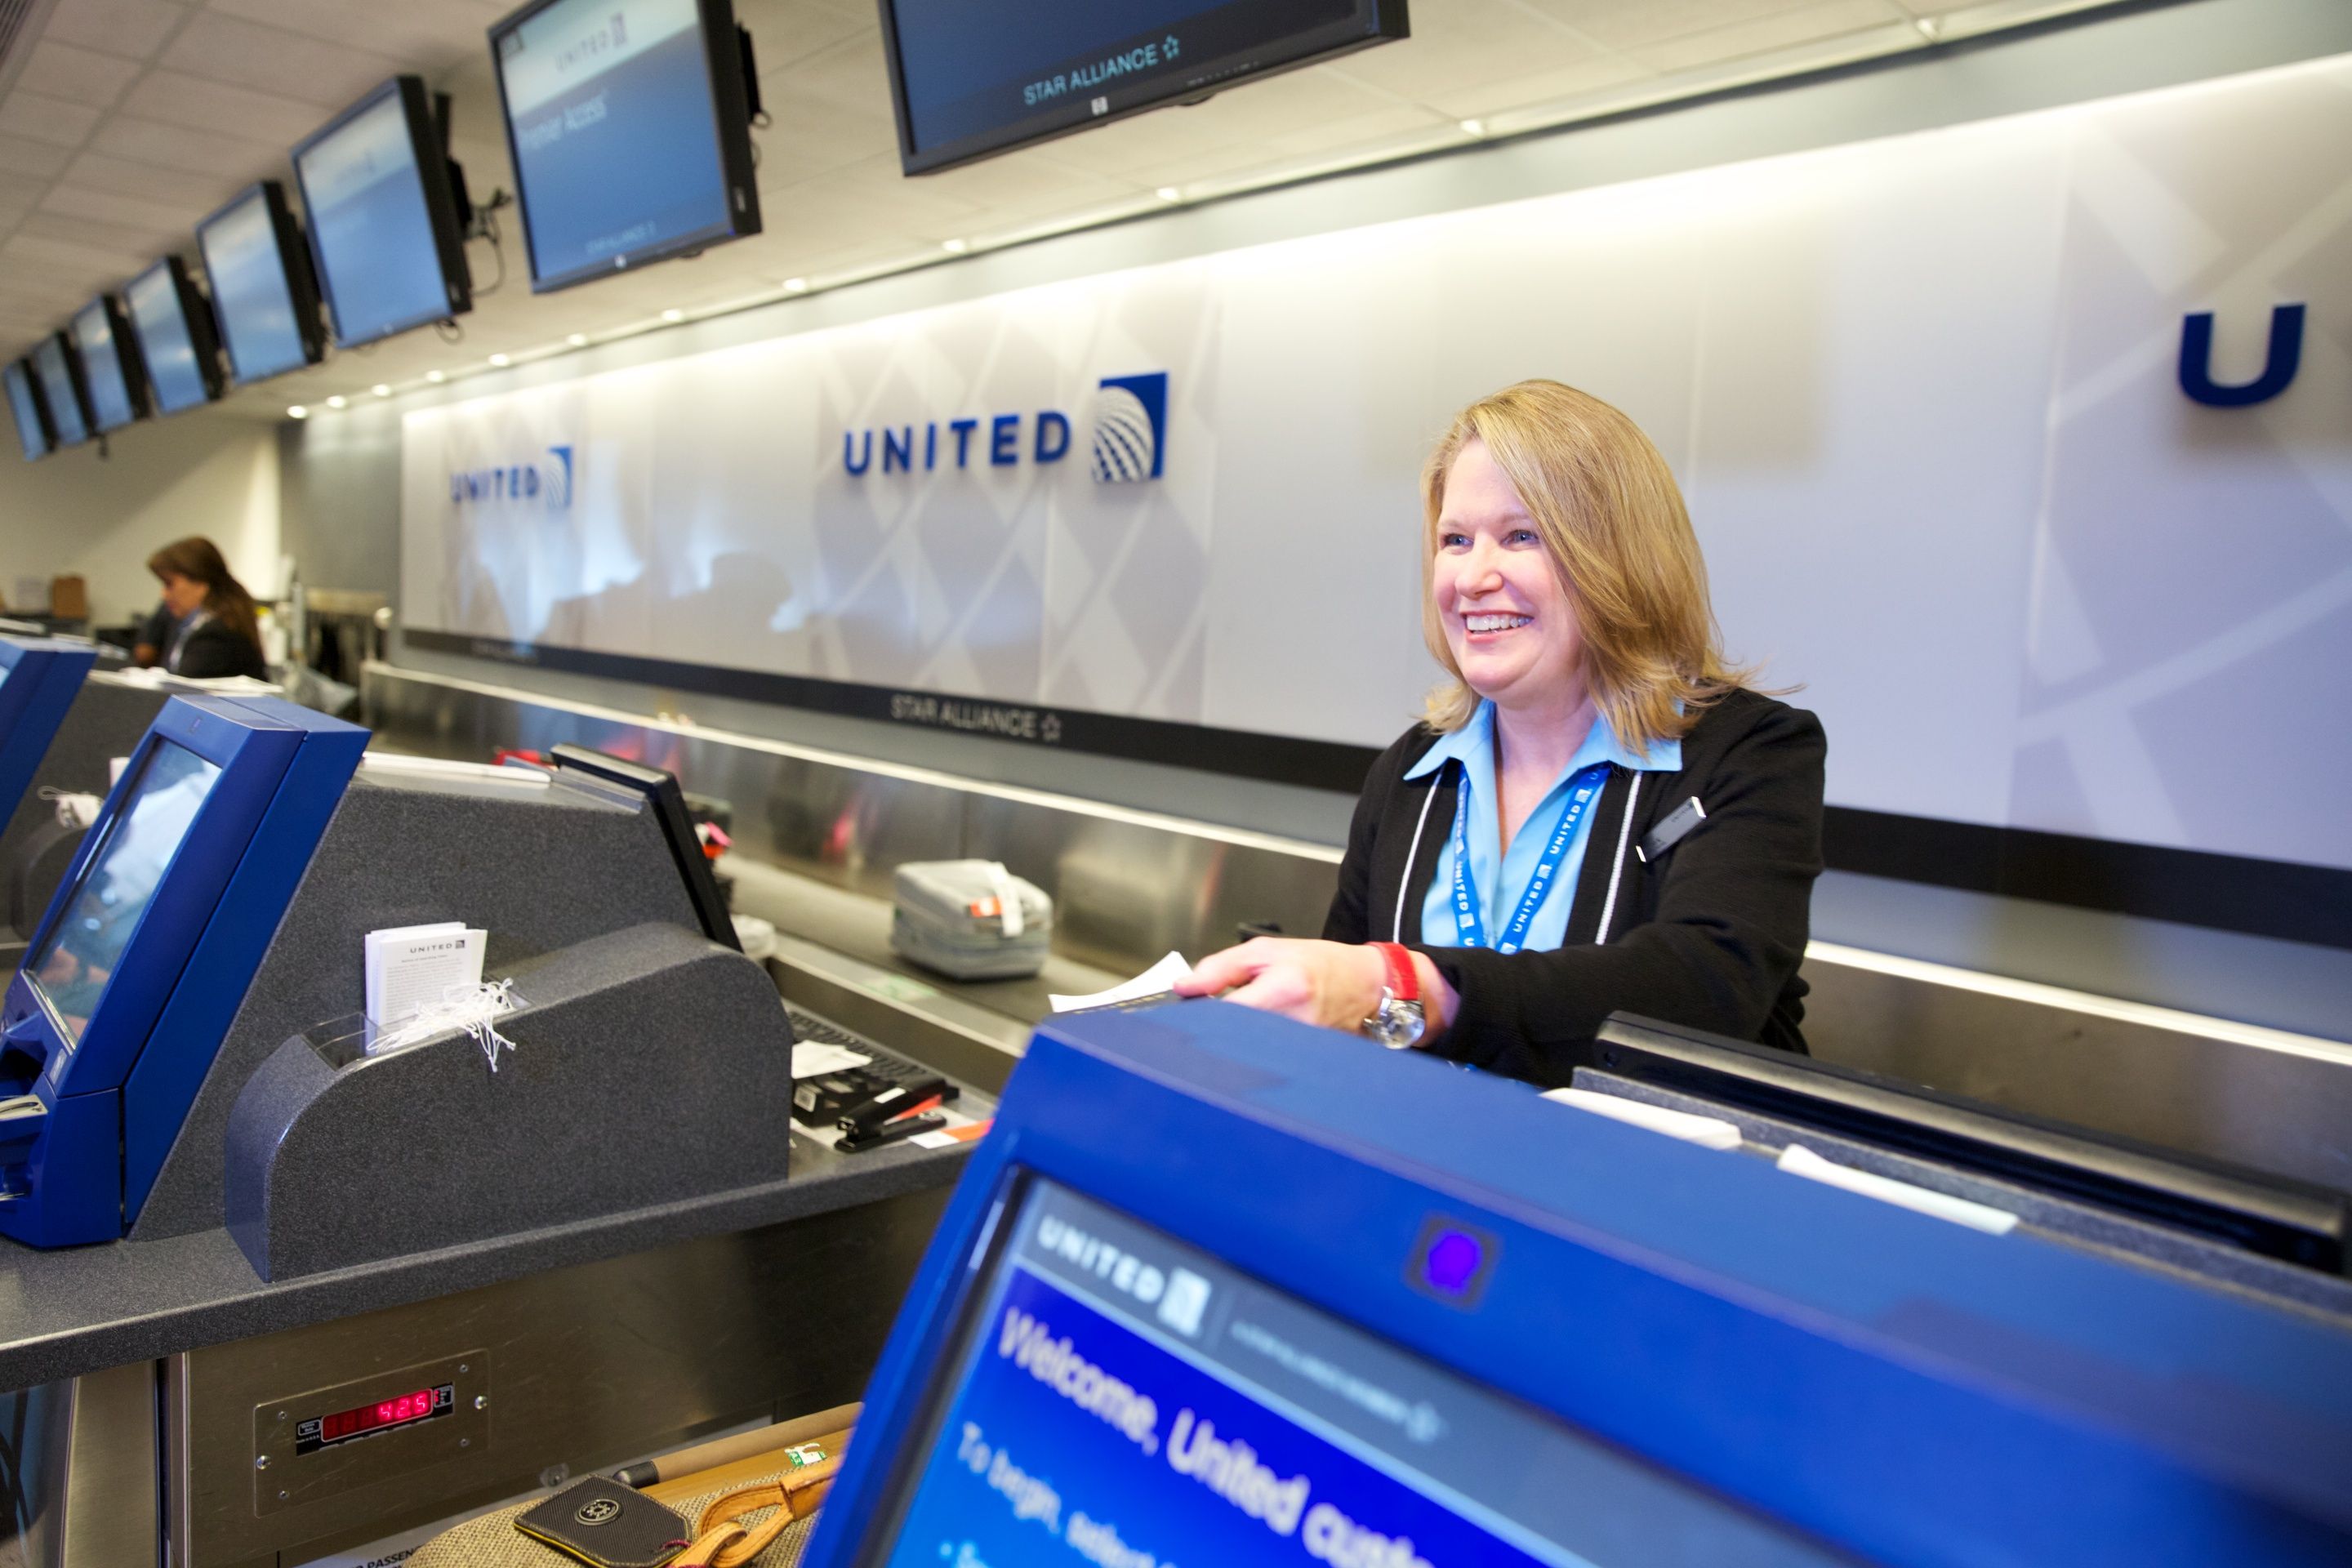 A Woman working at the United Airlines Check-in desk.